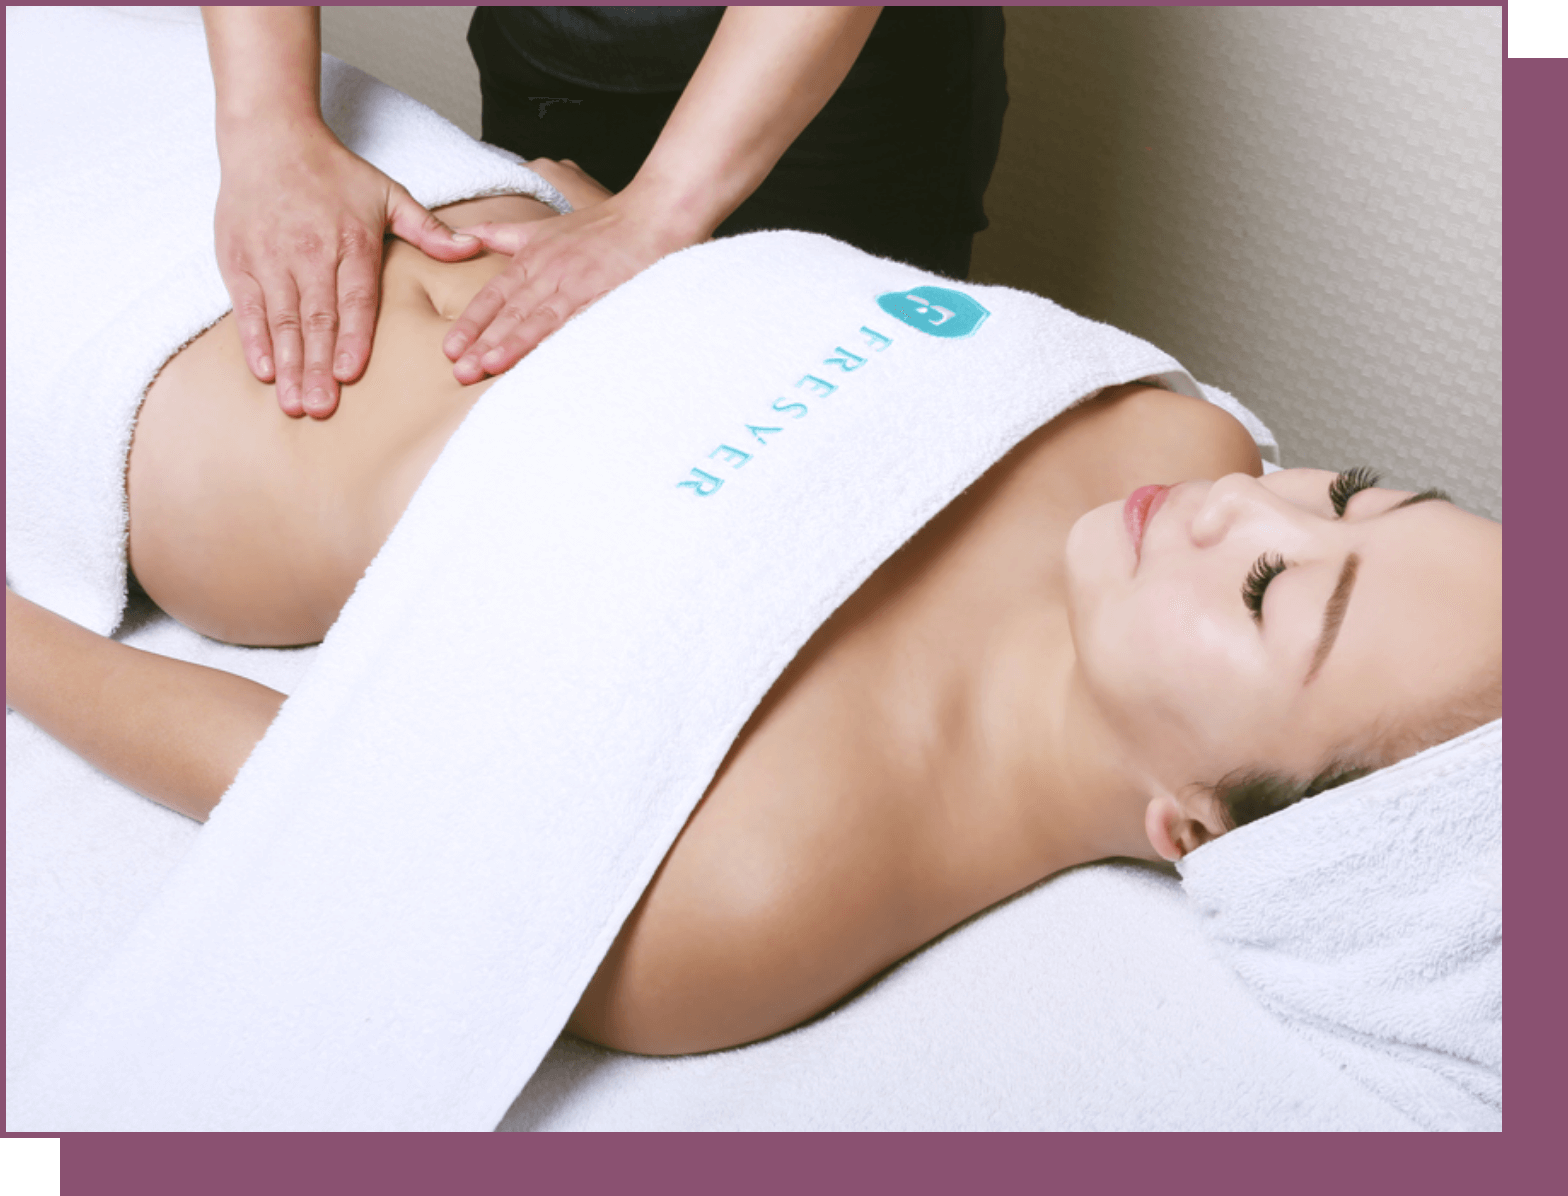 Best Womb Massage Services in Singapore: Top 5 Picks for Fertility Wellness